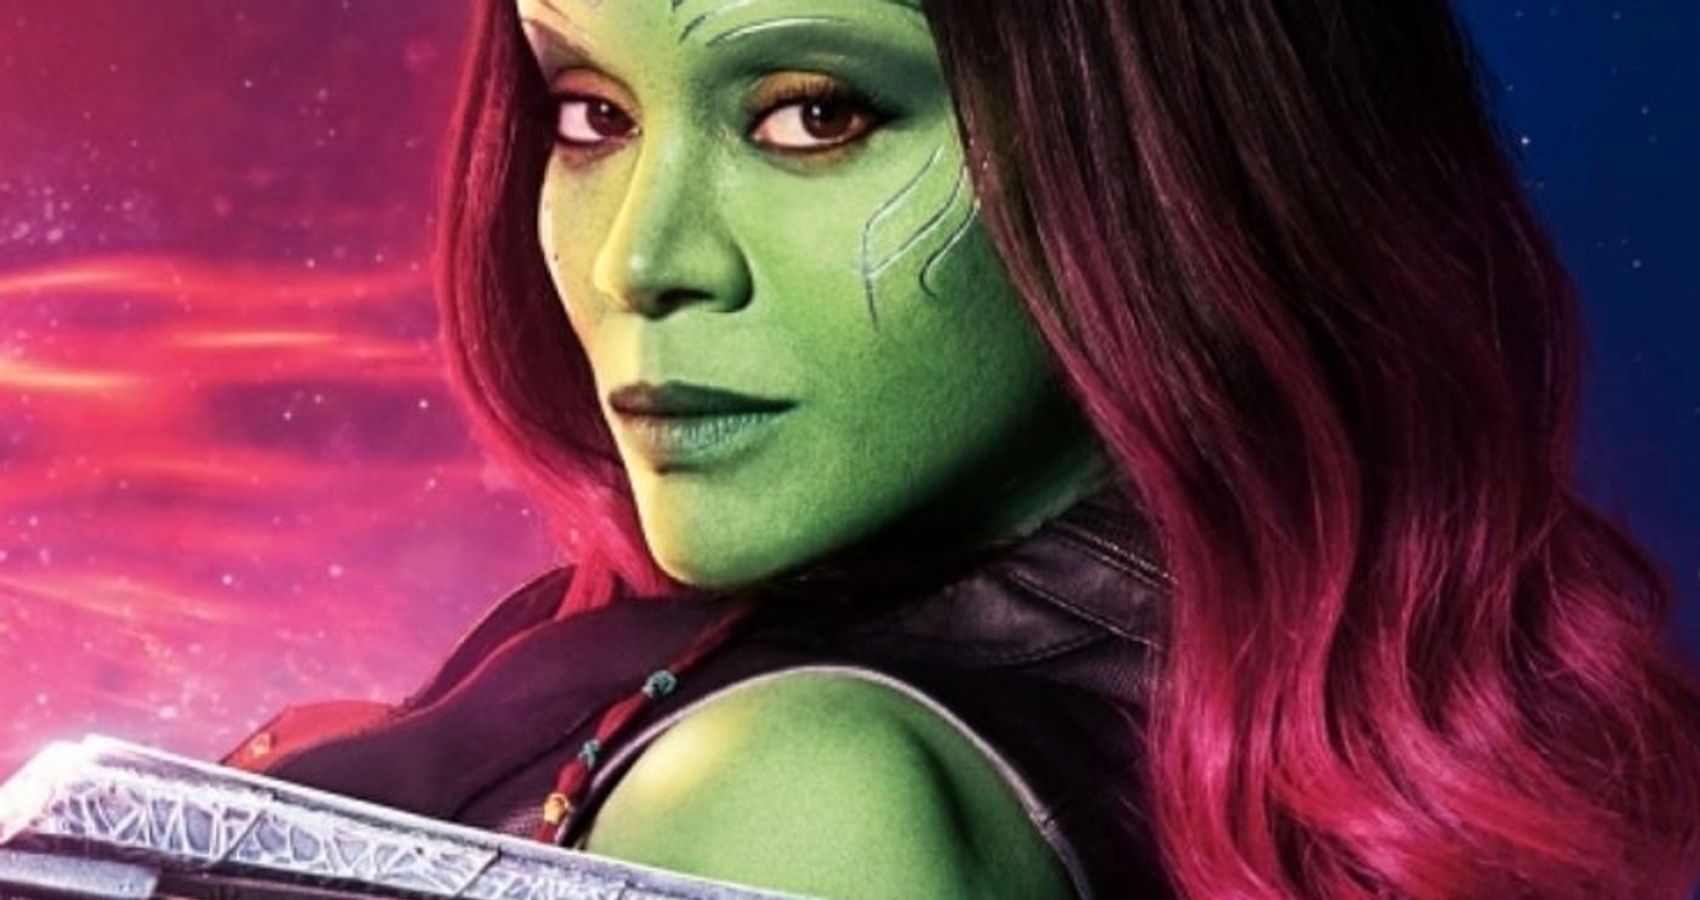 I love the Guardians, but Gamora has always just kind of felt “there” to me  (til Thanos needs the soul stone at least). I feel I know Nebula much  better. What moments